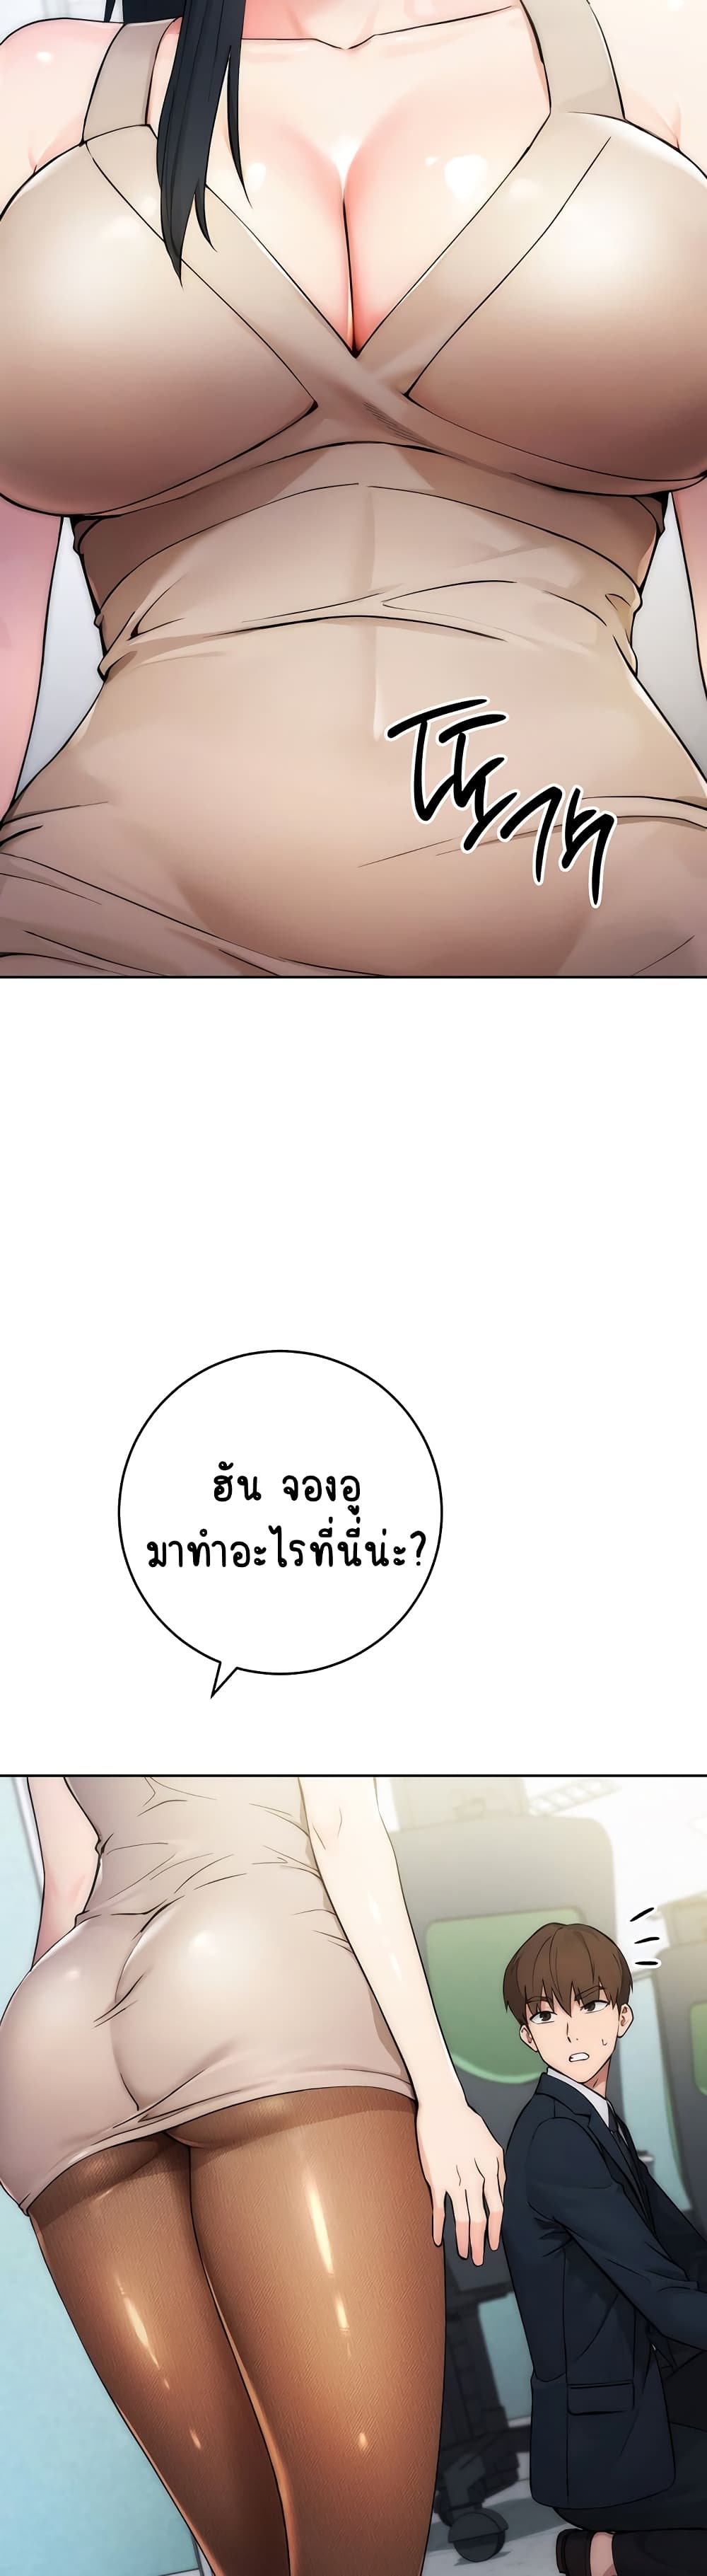 Outsider: The Invisible Man ตอนที่ 1 ภาพ 12